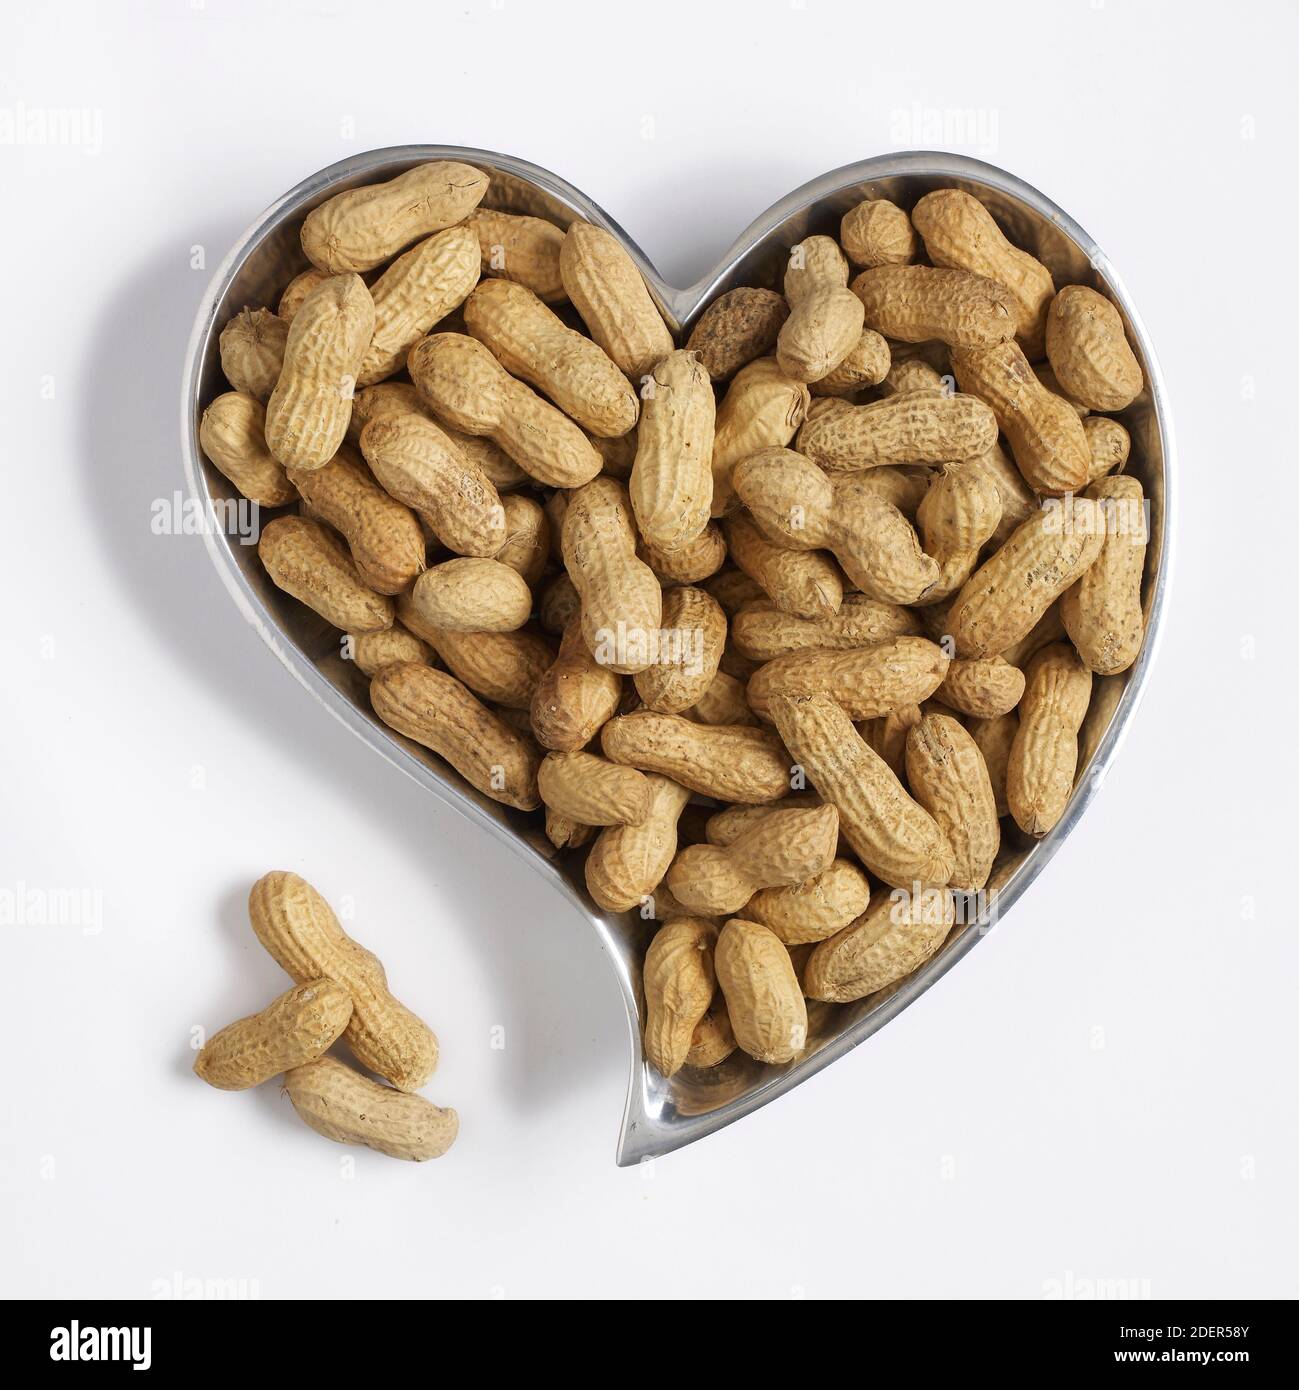 peanuts in heart-shaped container Stock Photo